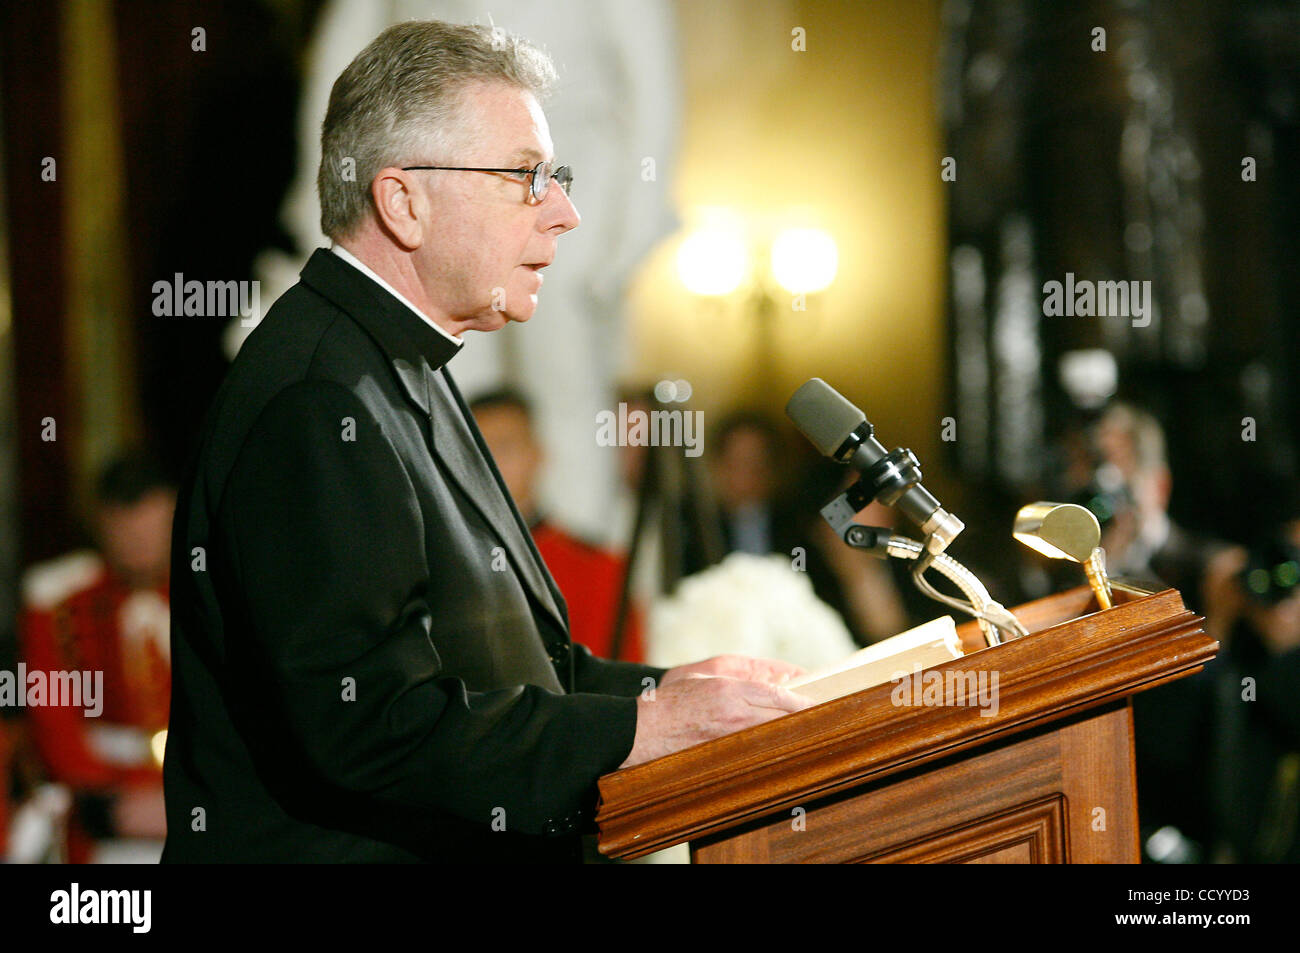 Mar. 03, 2010 - Washington, D.C, USA - Washington, D.C. - March 3rd, 2010:  In Statuary Hall at the U.S. Capitol, Rev. DANIEL COUGHLIN, chaplain of the House of Representatives, delivers the invocation at a memorial service for Rep. John Murtha, D-Pa., who died on February 8. (Credit Image: © James  Stock Photo